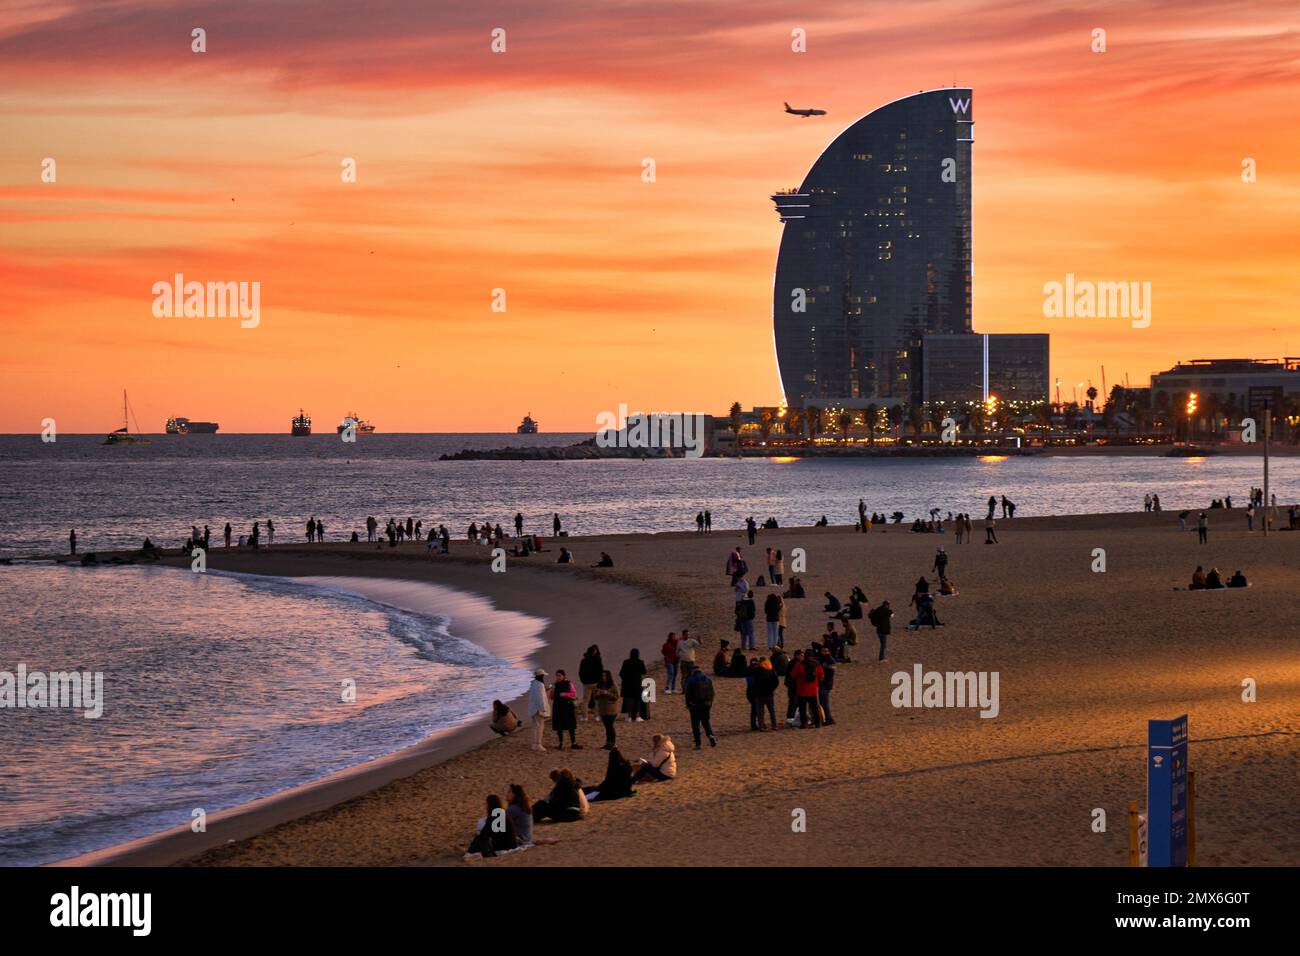 Sunset at Barceloneta Beach, in the background Hotel W, Barcelona, Catalonia, Spain. The sunset on the Barceloneta beach is a unique experience. The Stock Photo